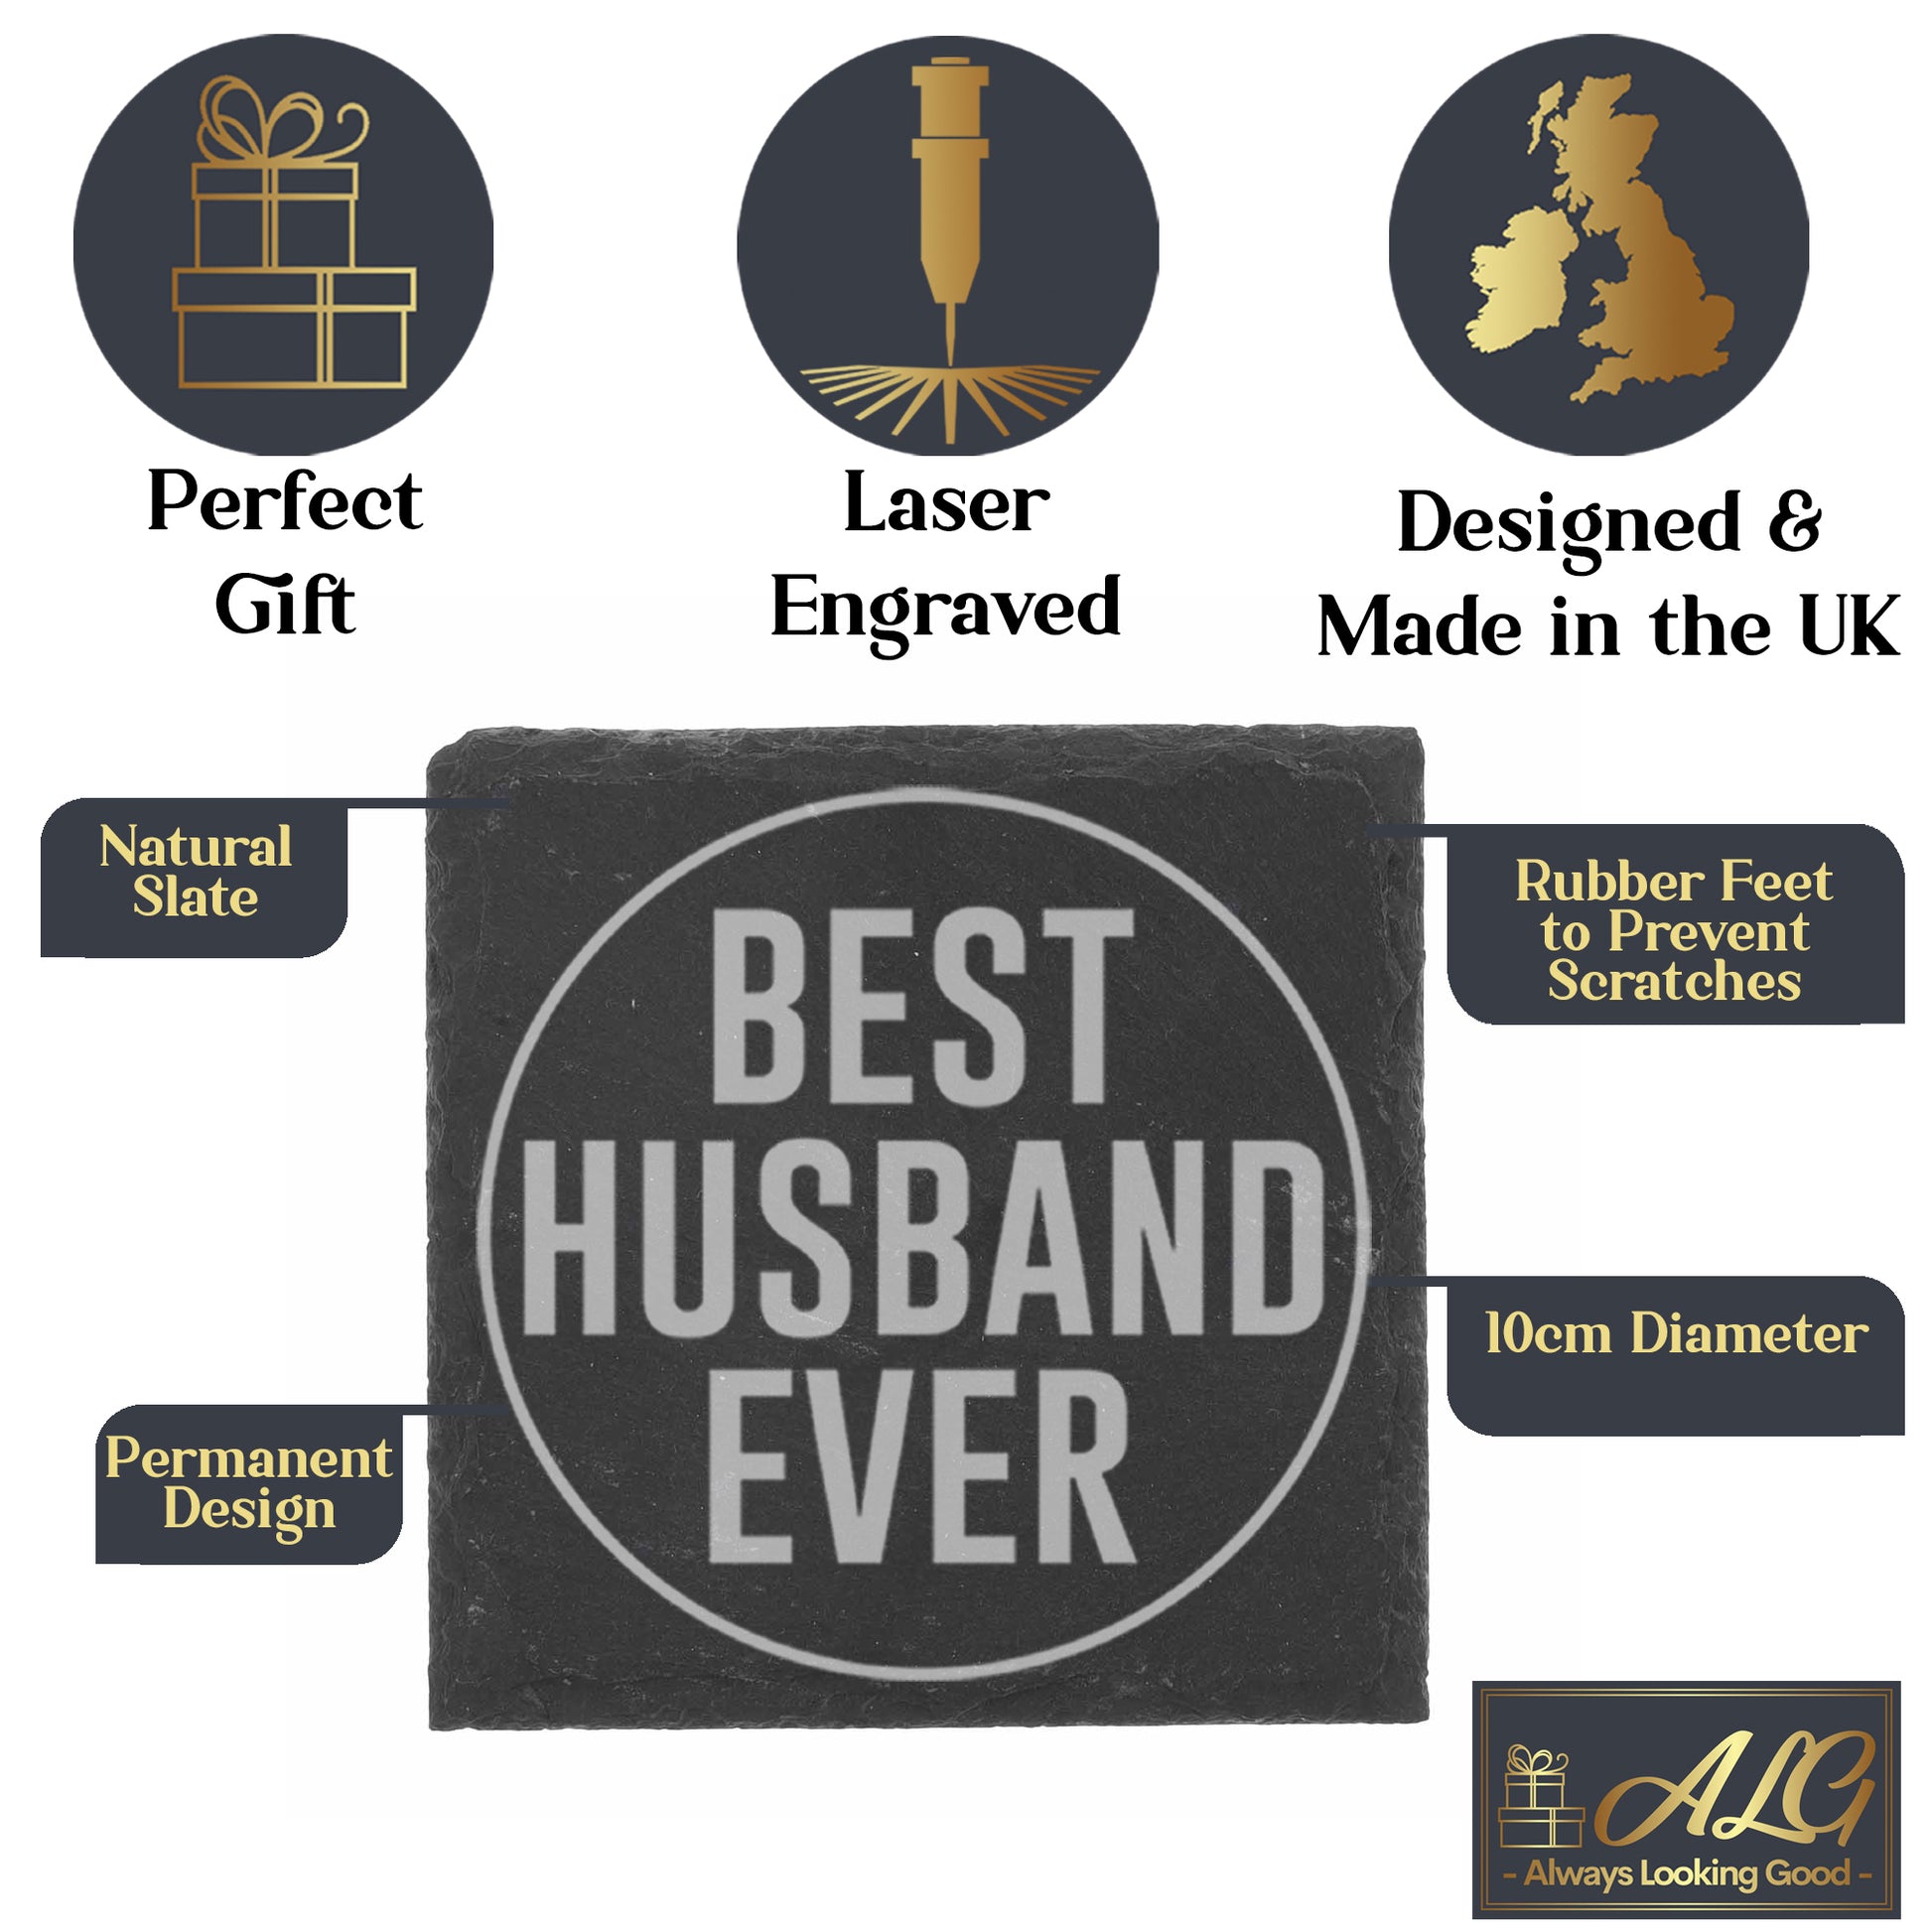 Best Husband Ever Engraved Beer Pint Glass and/or Coaster Set  - Always Looking Good - Square Coaster Only  